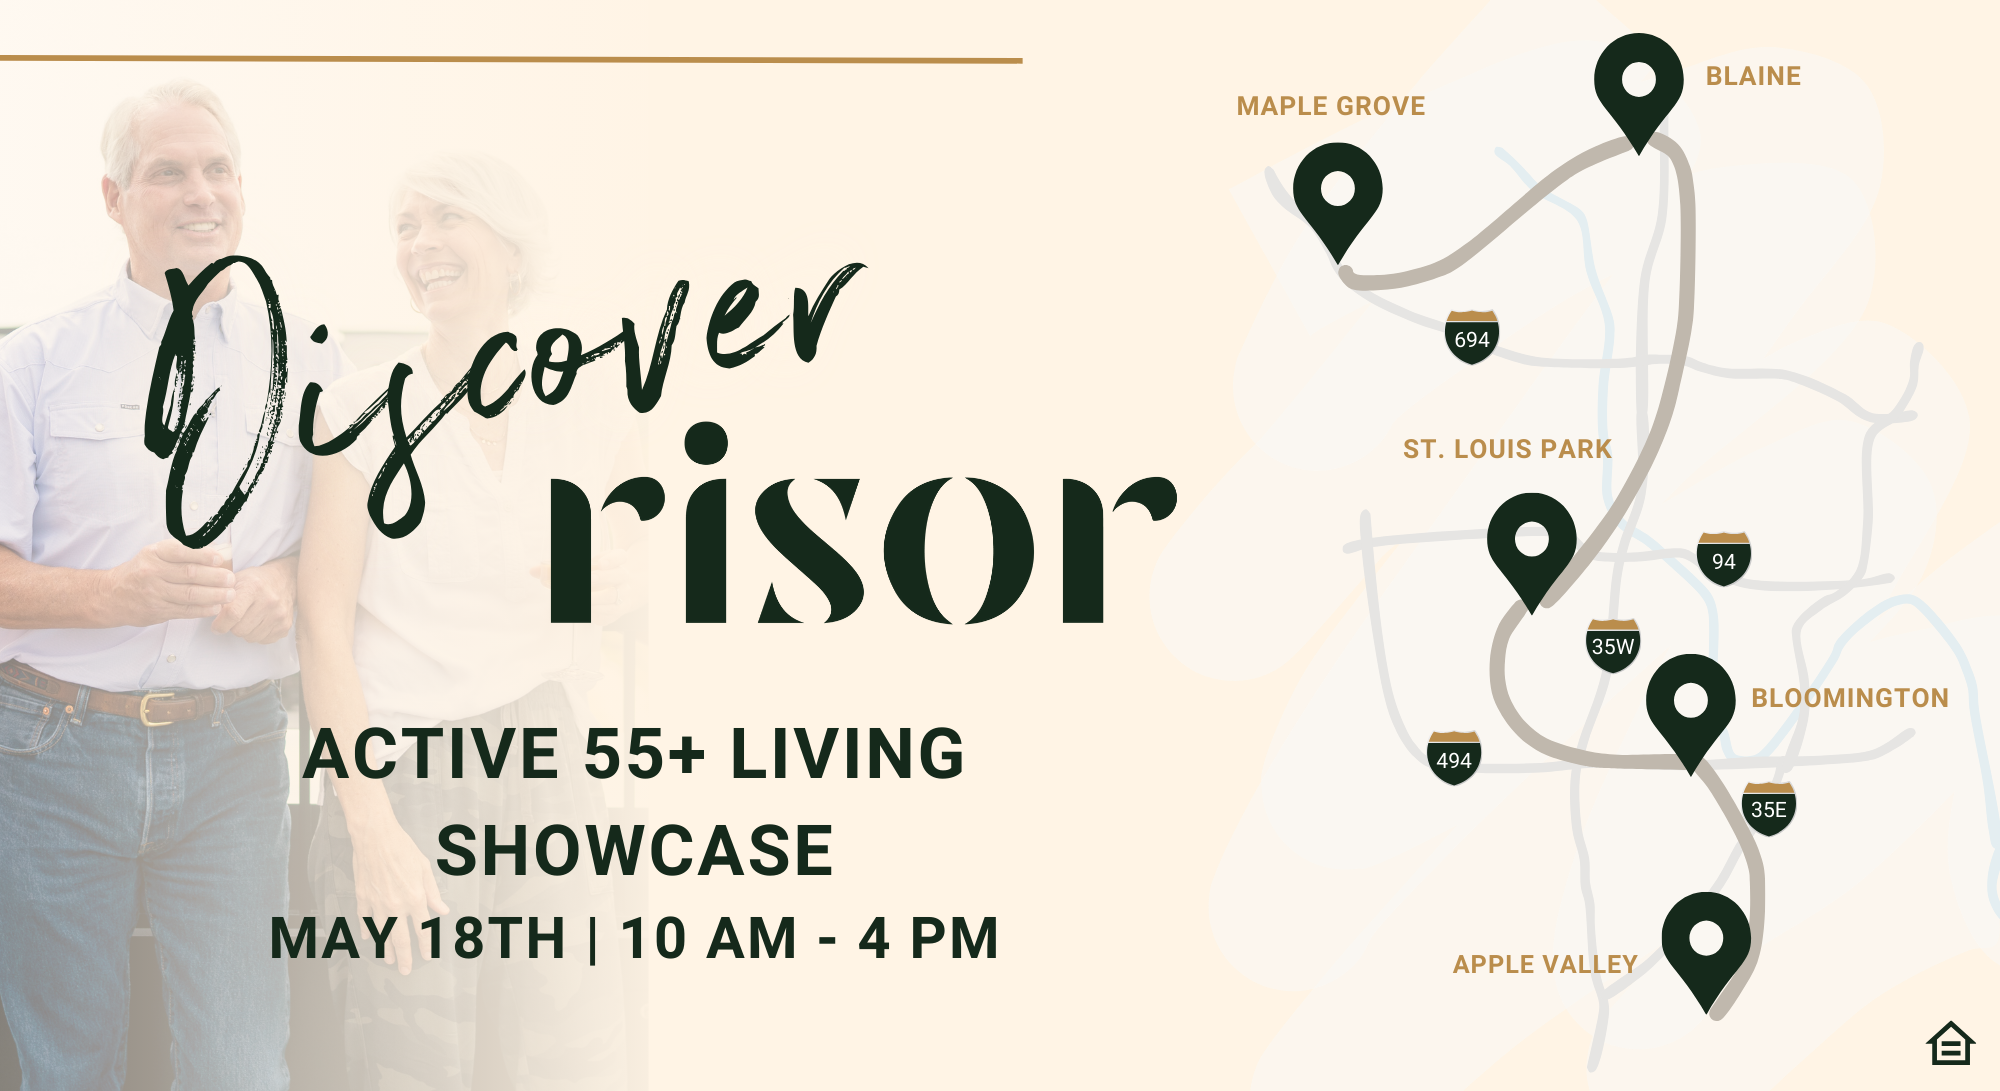 Discover Risor: Active 55+ Living Showcase. May 18th 10AM-4PM